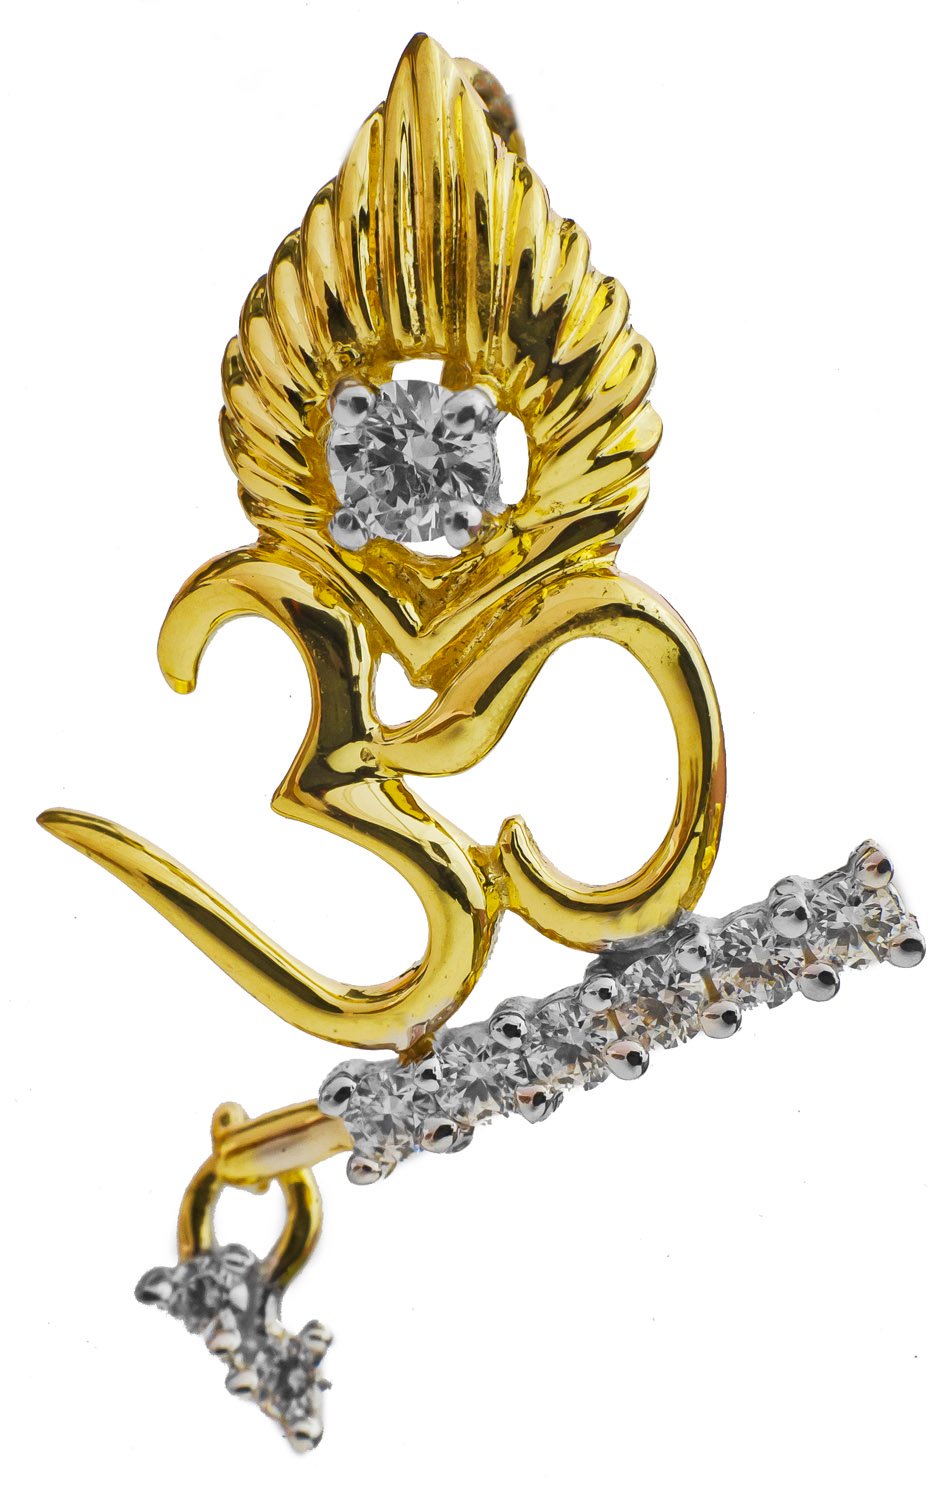 OM (AUM) Pendant with Krishna's Flute and Peacock Feather | Exotic ...